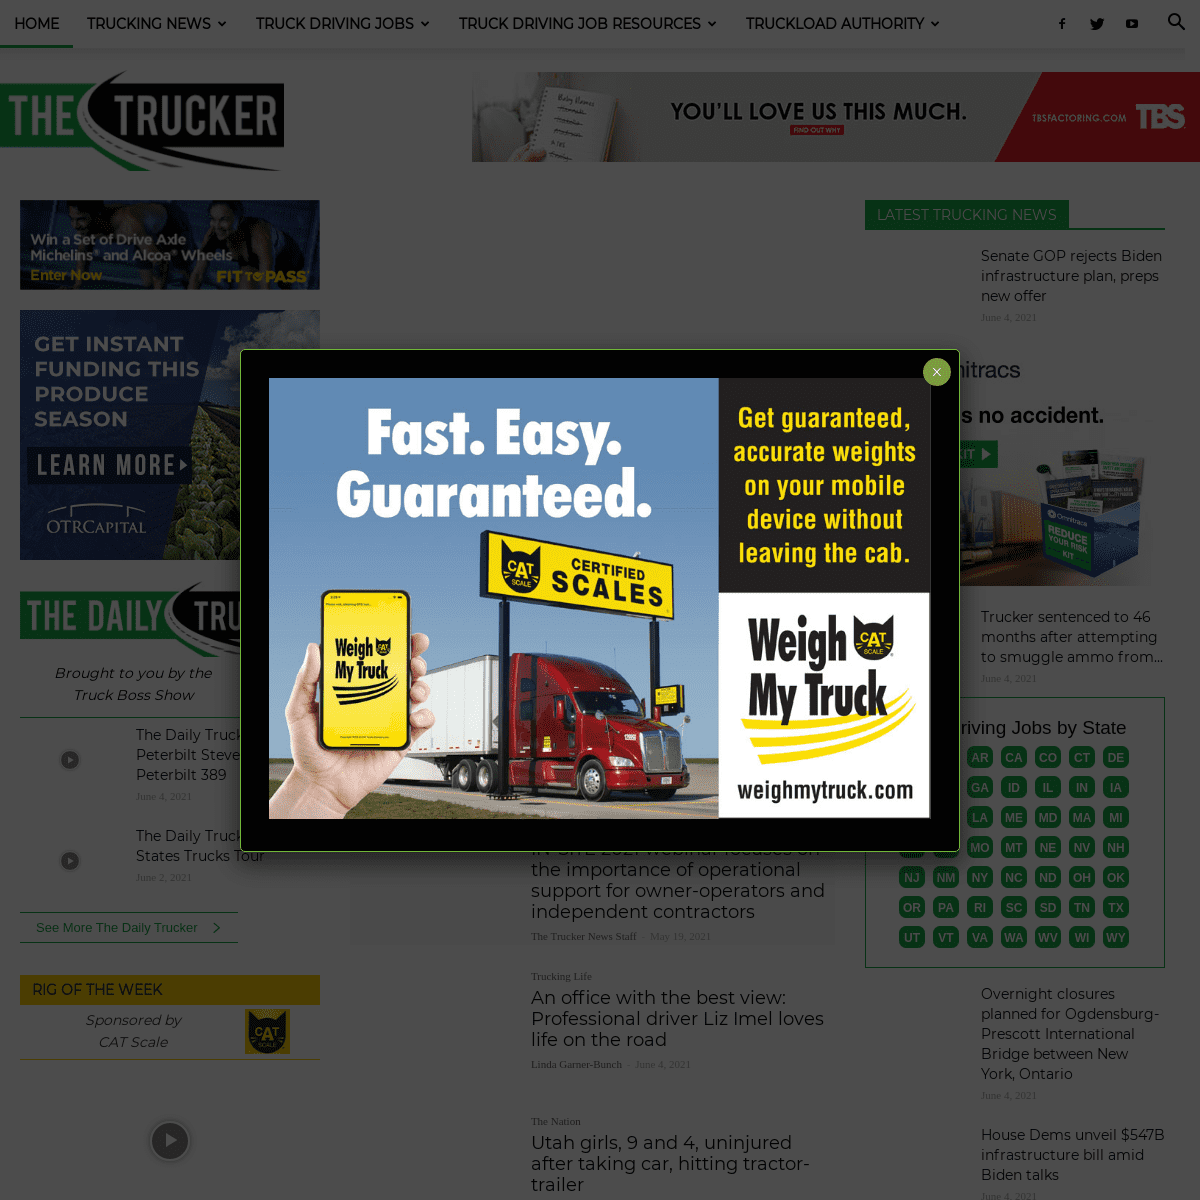 A complete backup of https://thetrucker.com